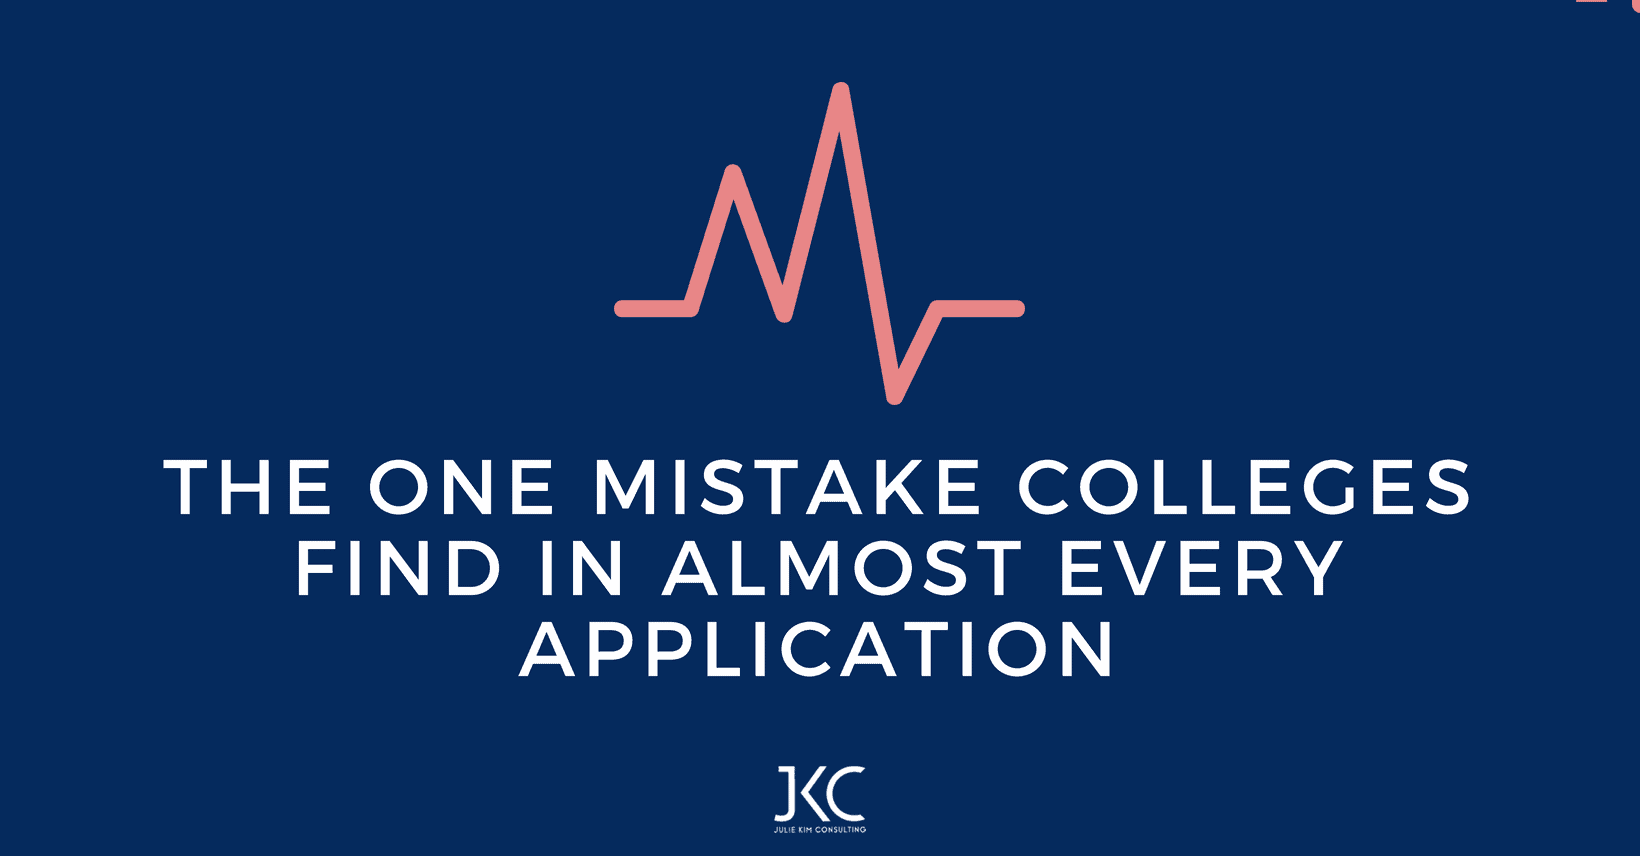 The One Mistake Colleges Find in Almost Every Application